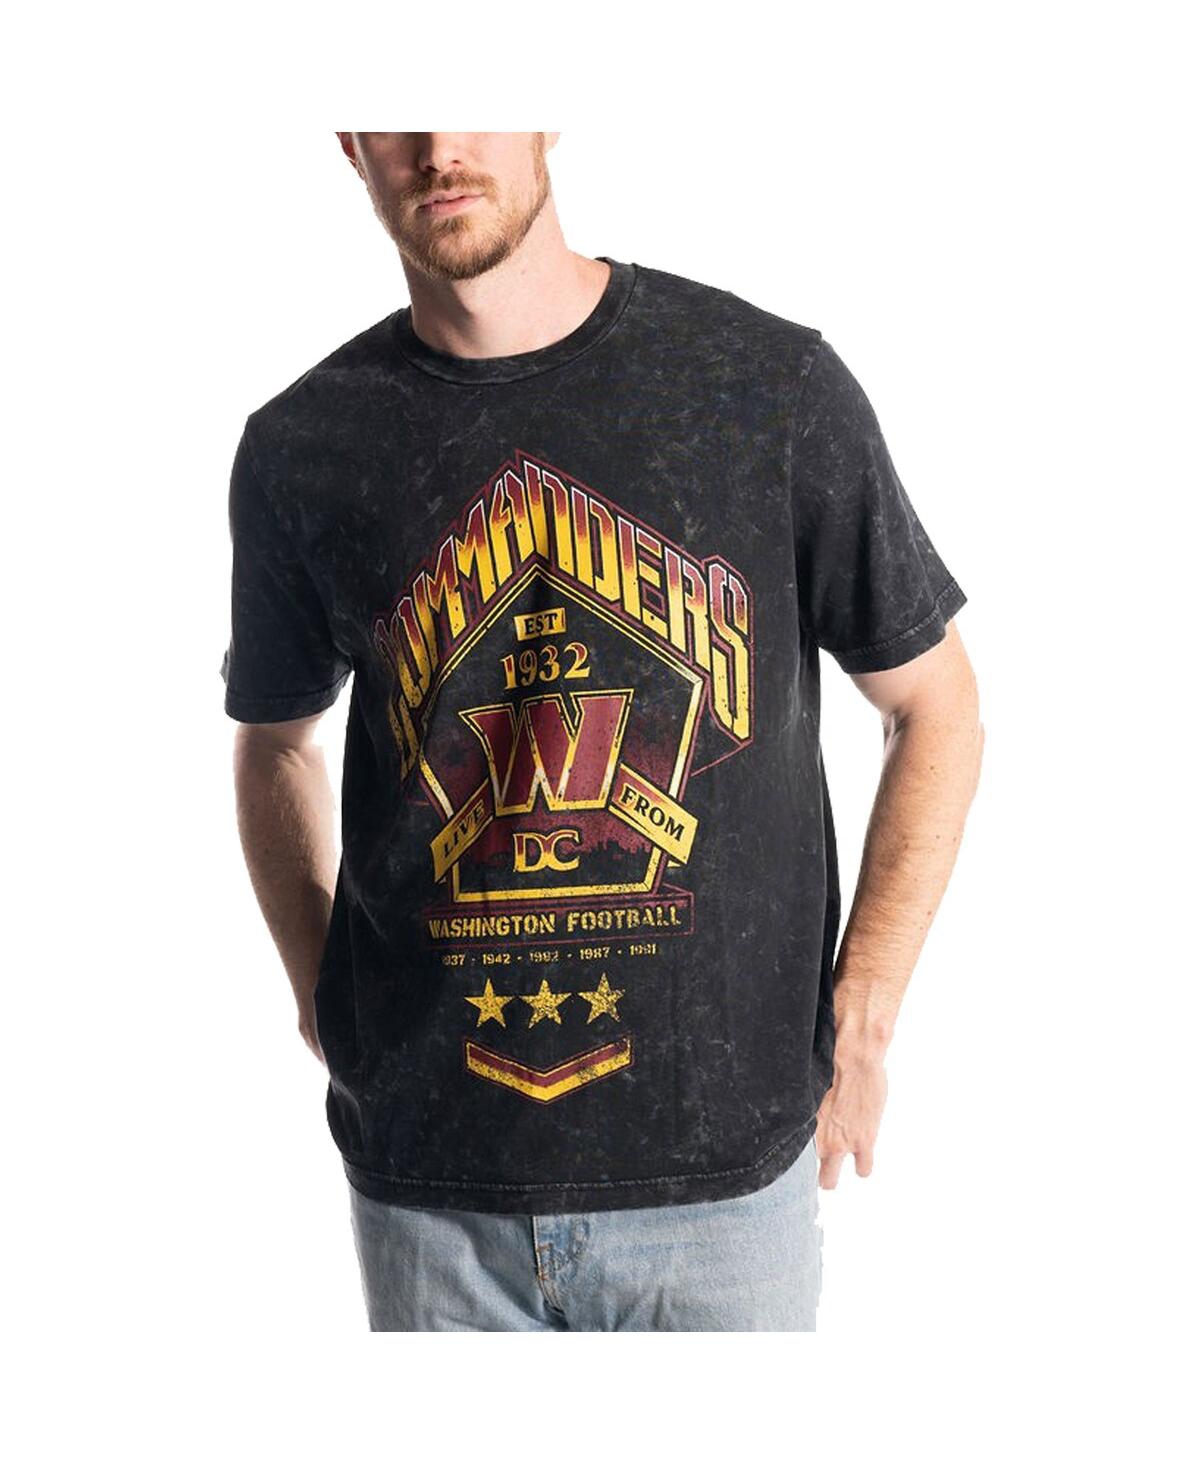 Men's and Women's The Wild Collective Black Washington Commanders Band T-shirt - Black